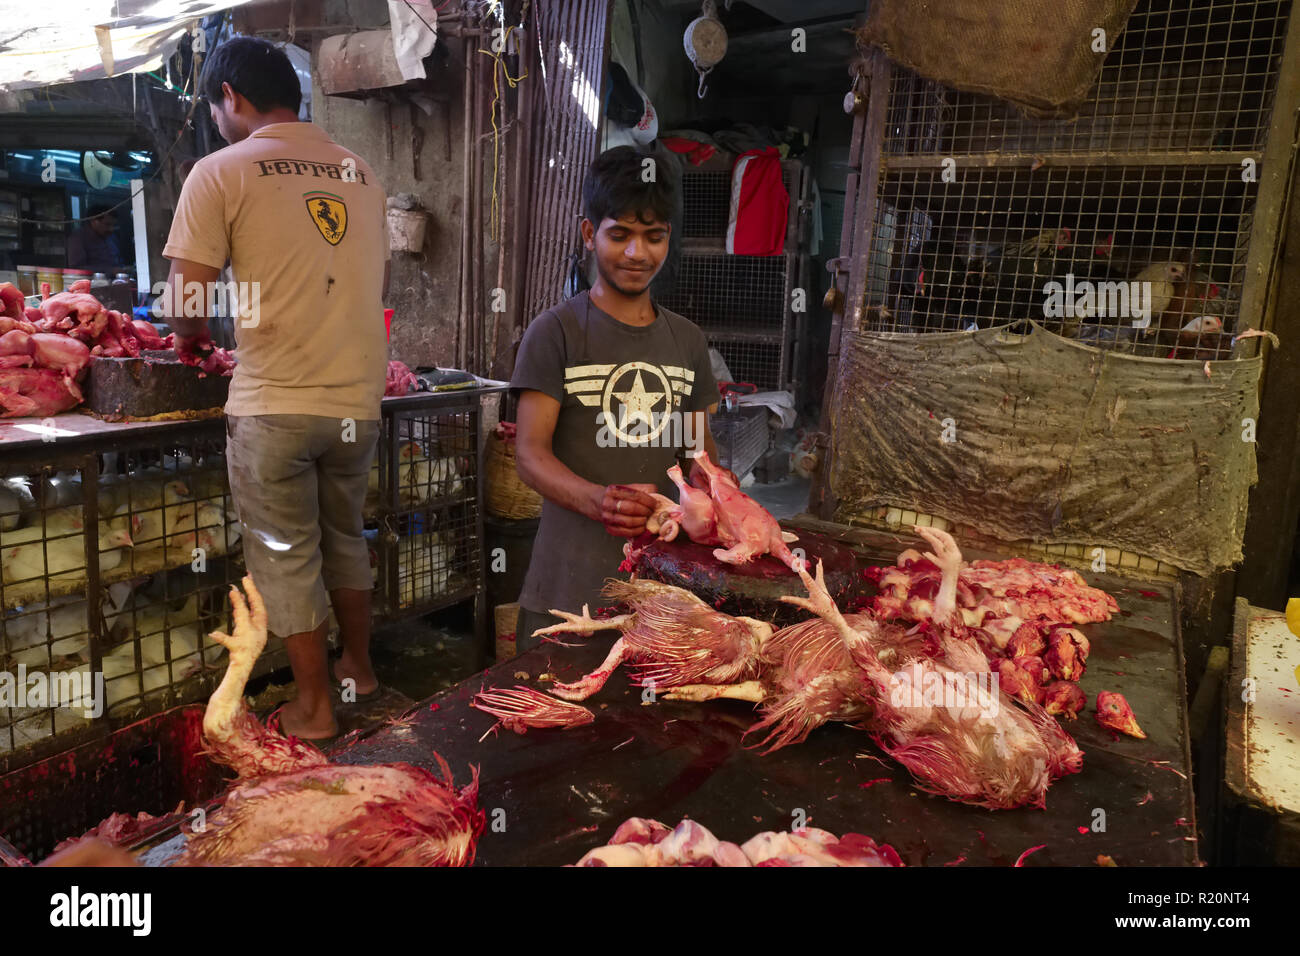 Inside a slaughterhouse in Null Bazar area, Mumbai, India, the animals being killed and processed in a haphazard, cruel and unsanitary way Stock Photo